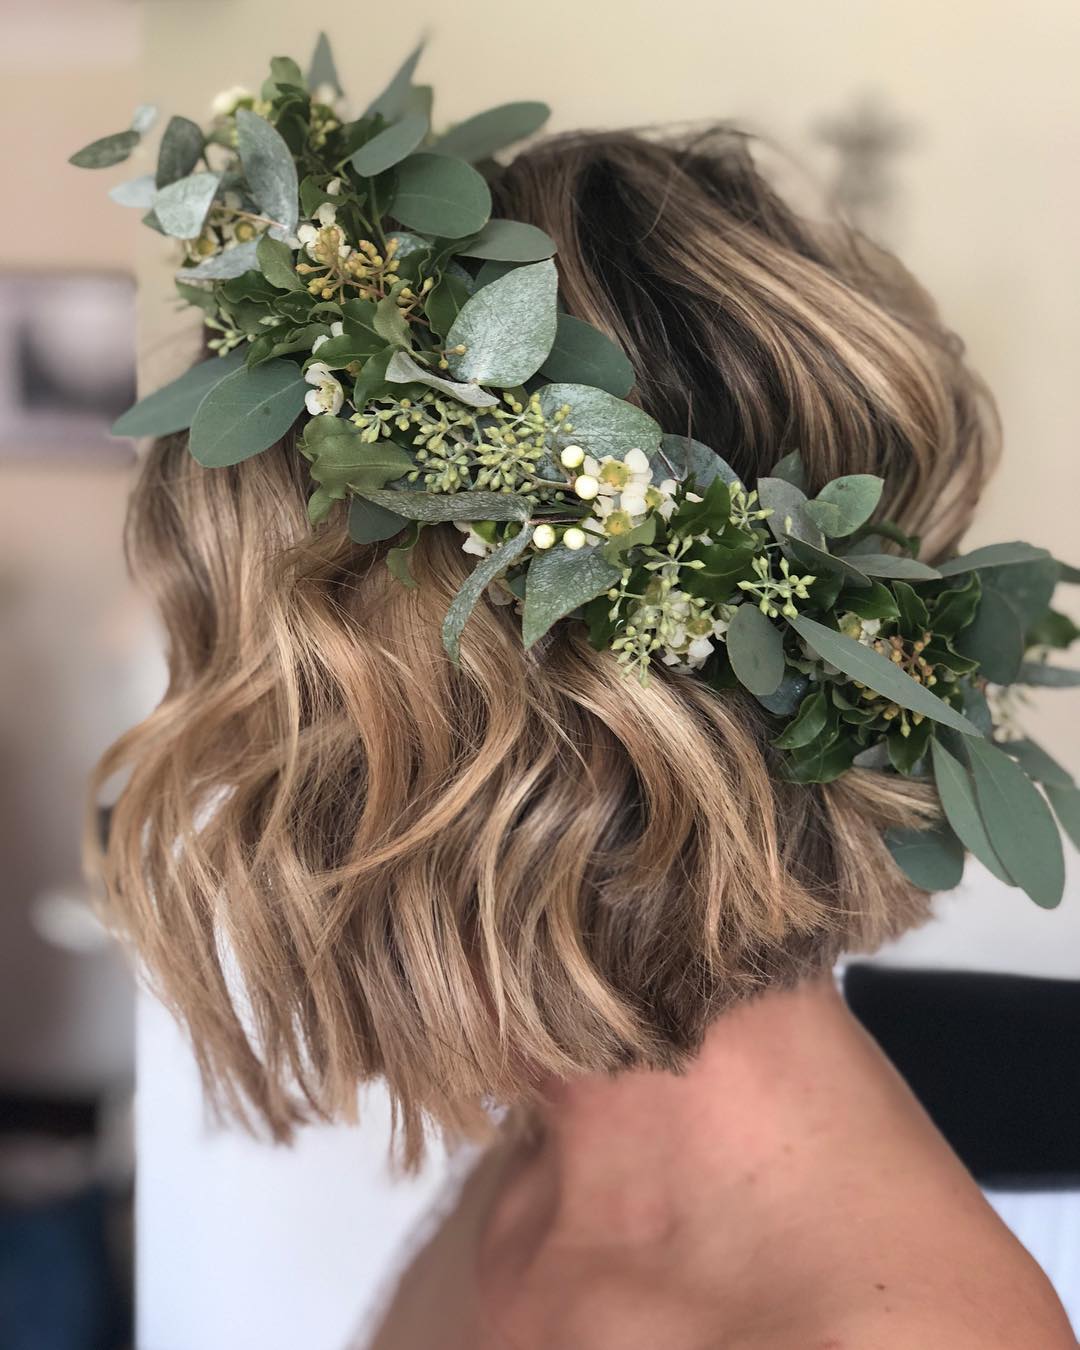 blonde bridal hair on short length hair styled down with beach waves, topped with a gorgeous greenery floral crown